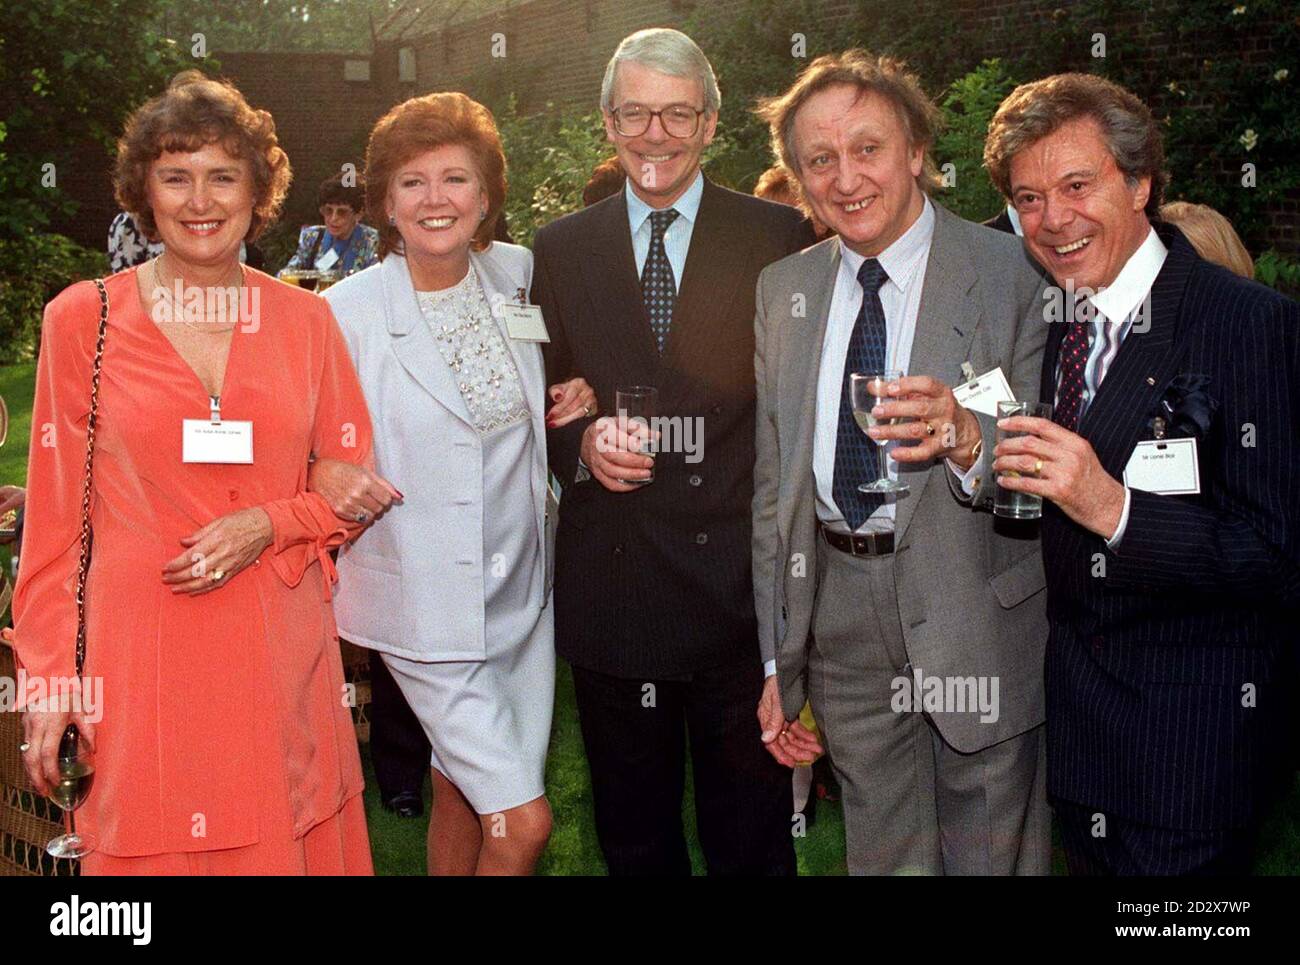 Prime Minister John Major with showbiz personalities at a Downing Street party hosted by him today (Monday). From left: Anna Jones, Blind Date presenter Cilla Black, John Major, comedian Ken Dodd and dancer Lionel Blair. Photo by Michael Stephens/PA Stock Photo